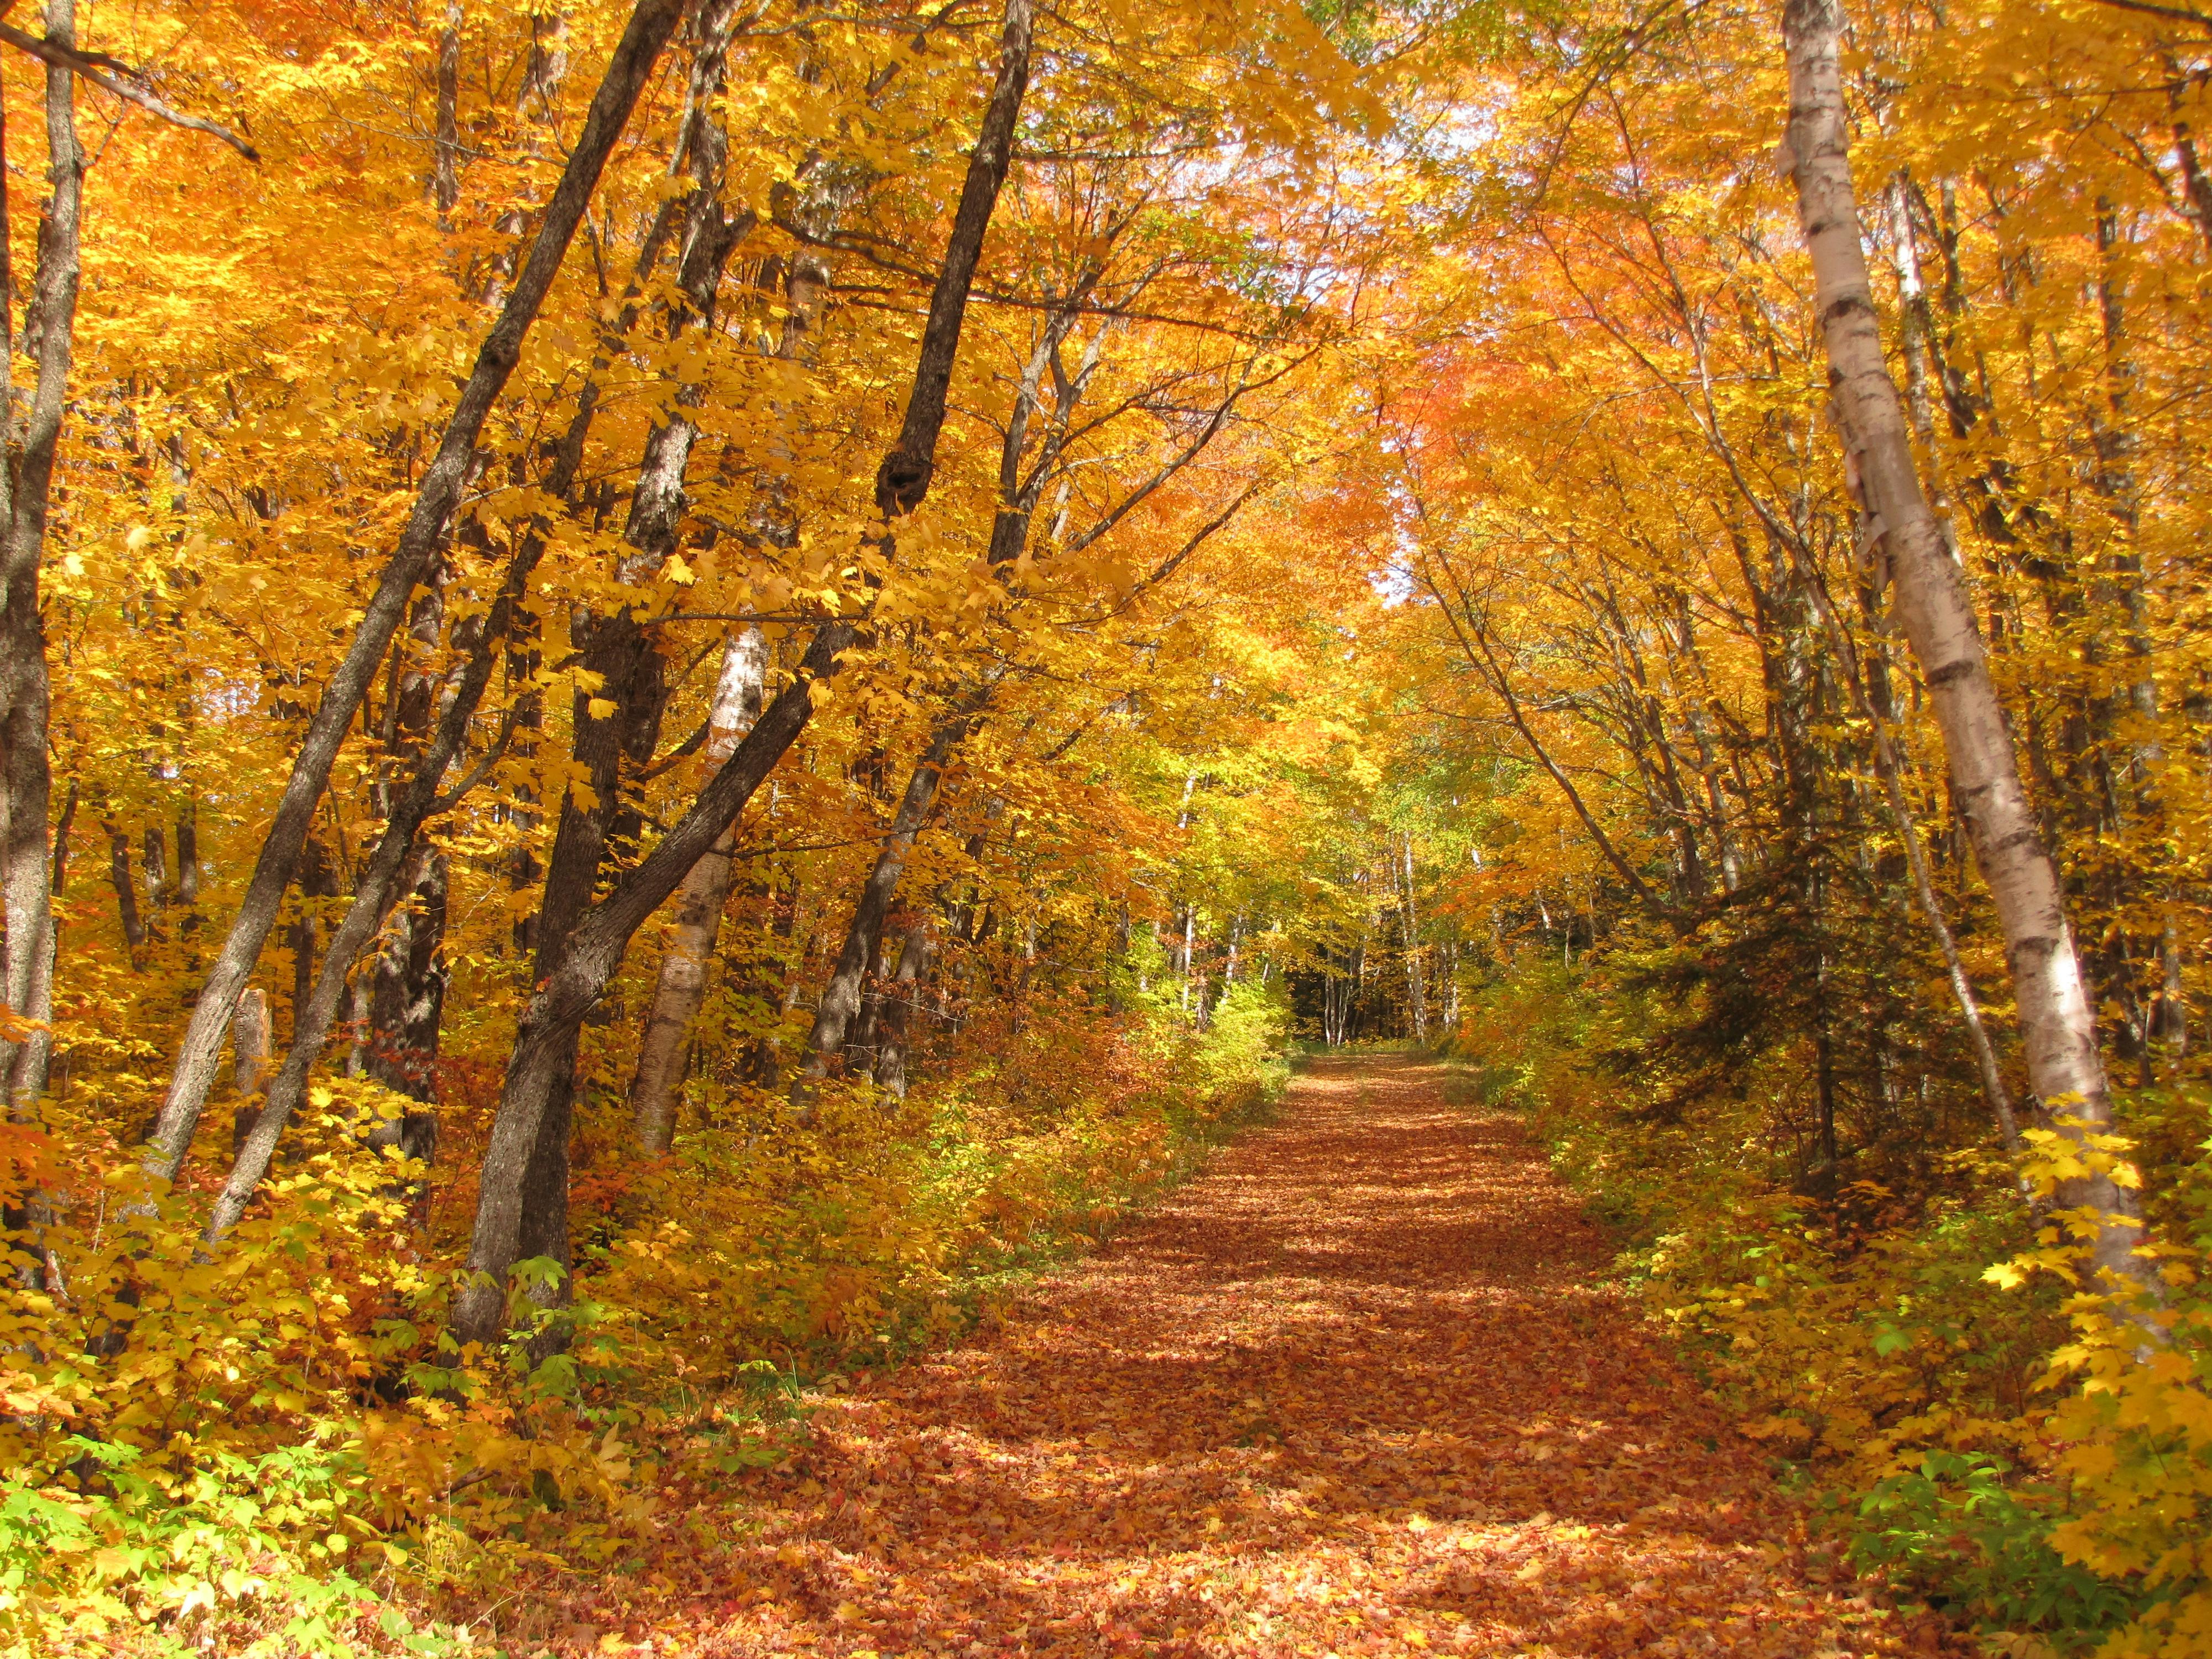 A road in Superior National Forest is covered in orange and yellow fall foliage leaves.